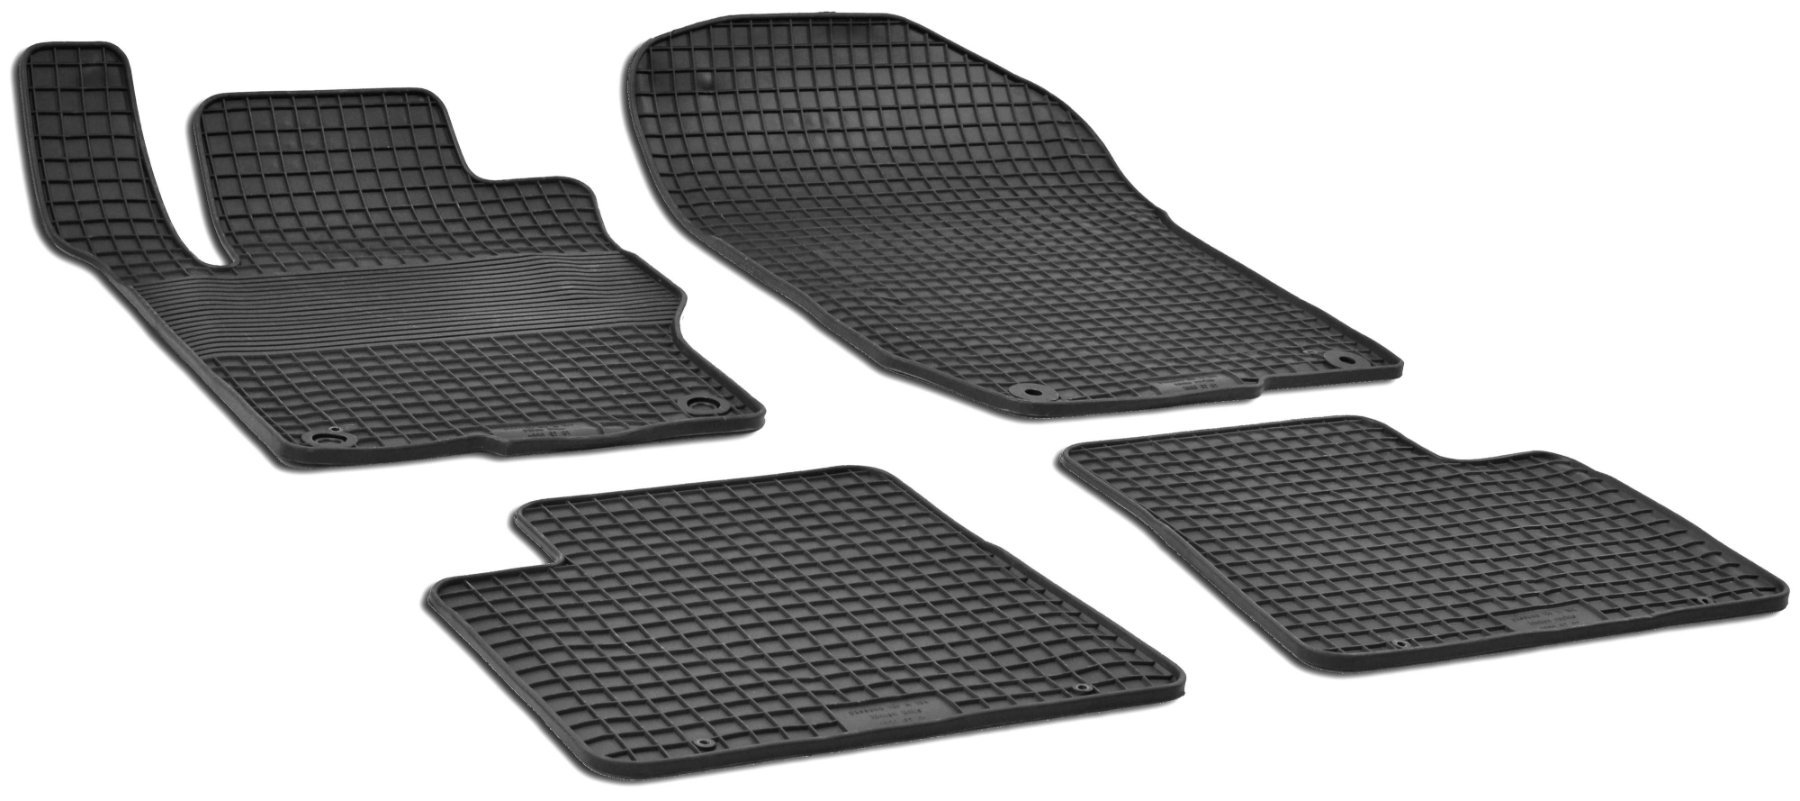 Rubber mats RubberLine for Mercedes-Benz GLE 04/2015-10/2018, M-Class 02/2005-12/2015, GLE Coupe 03/2015-10/2019